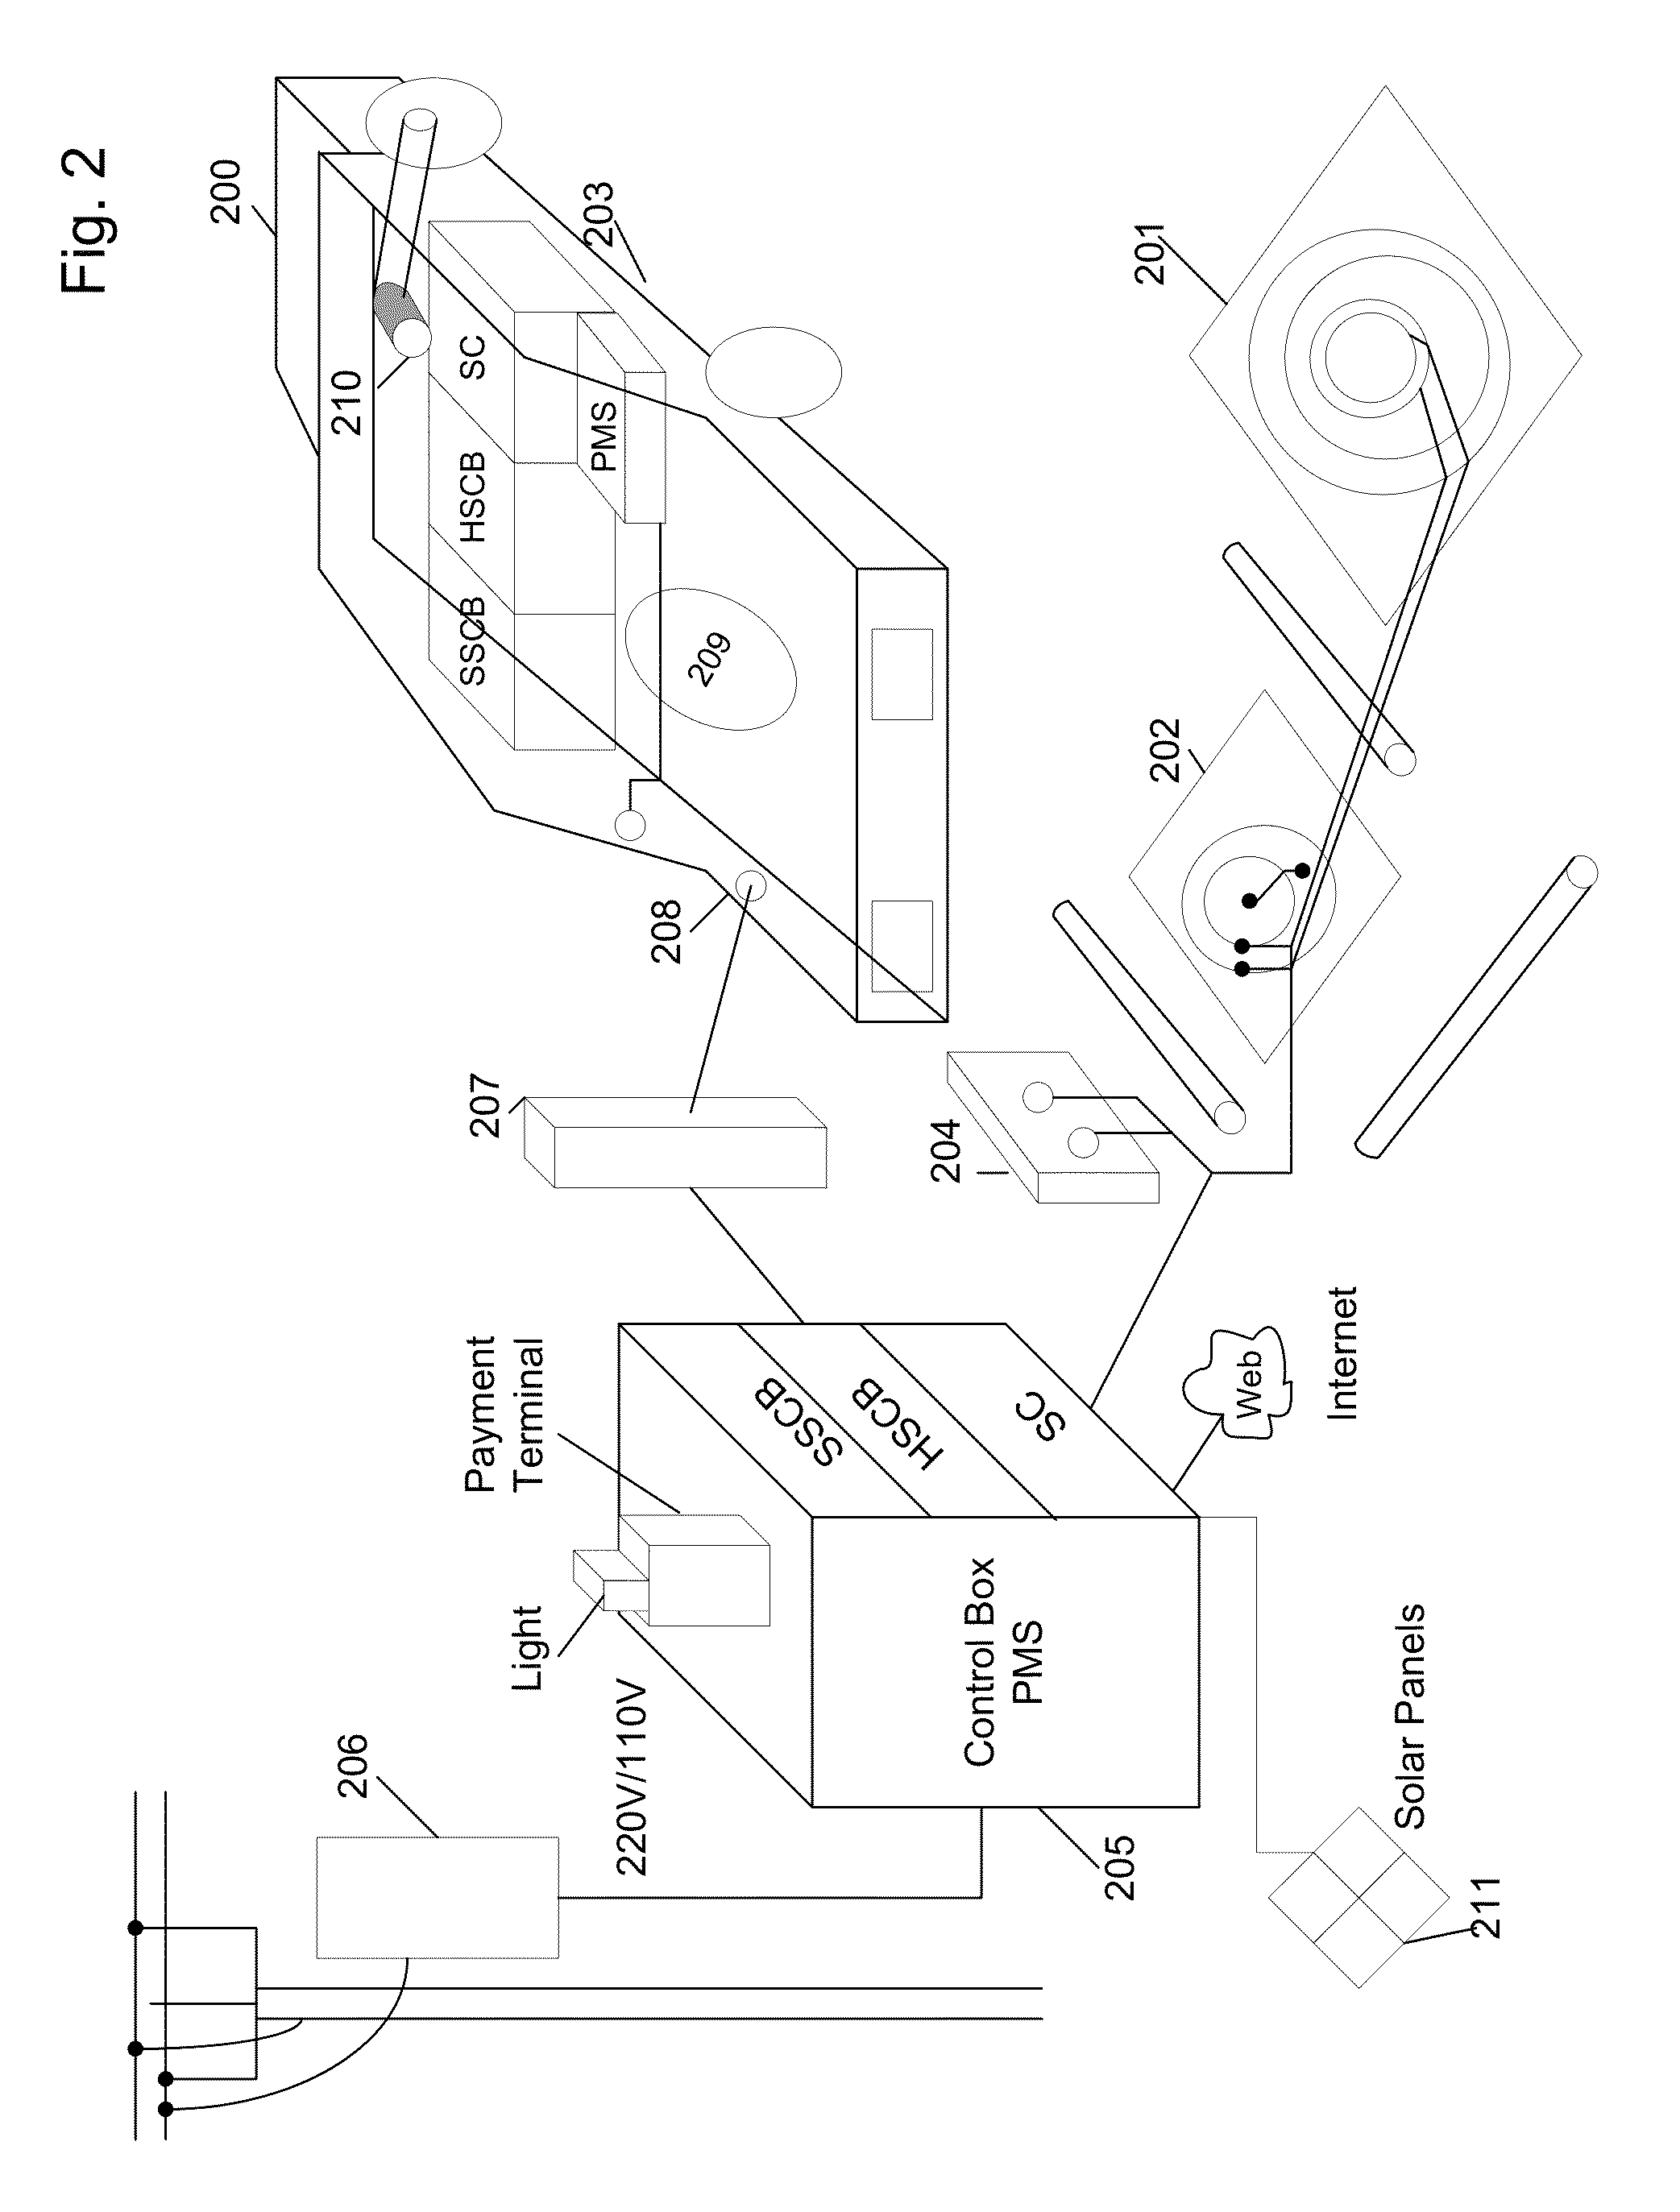 Self-charging electric vehicle and aircraft and wireless energy distribution system